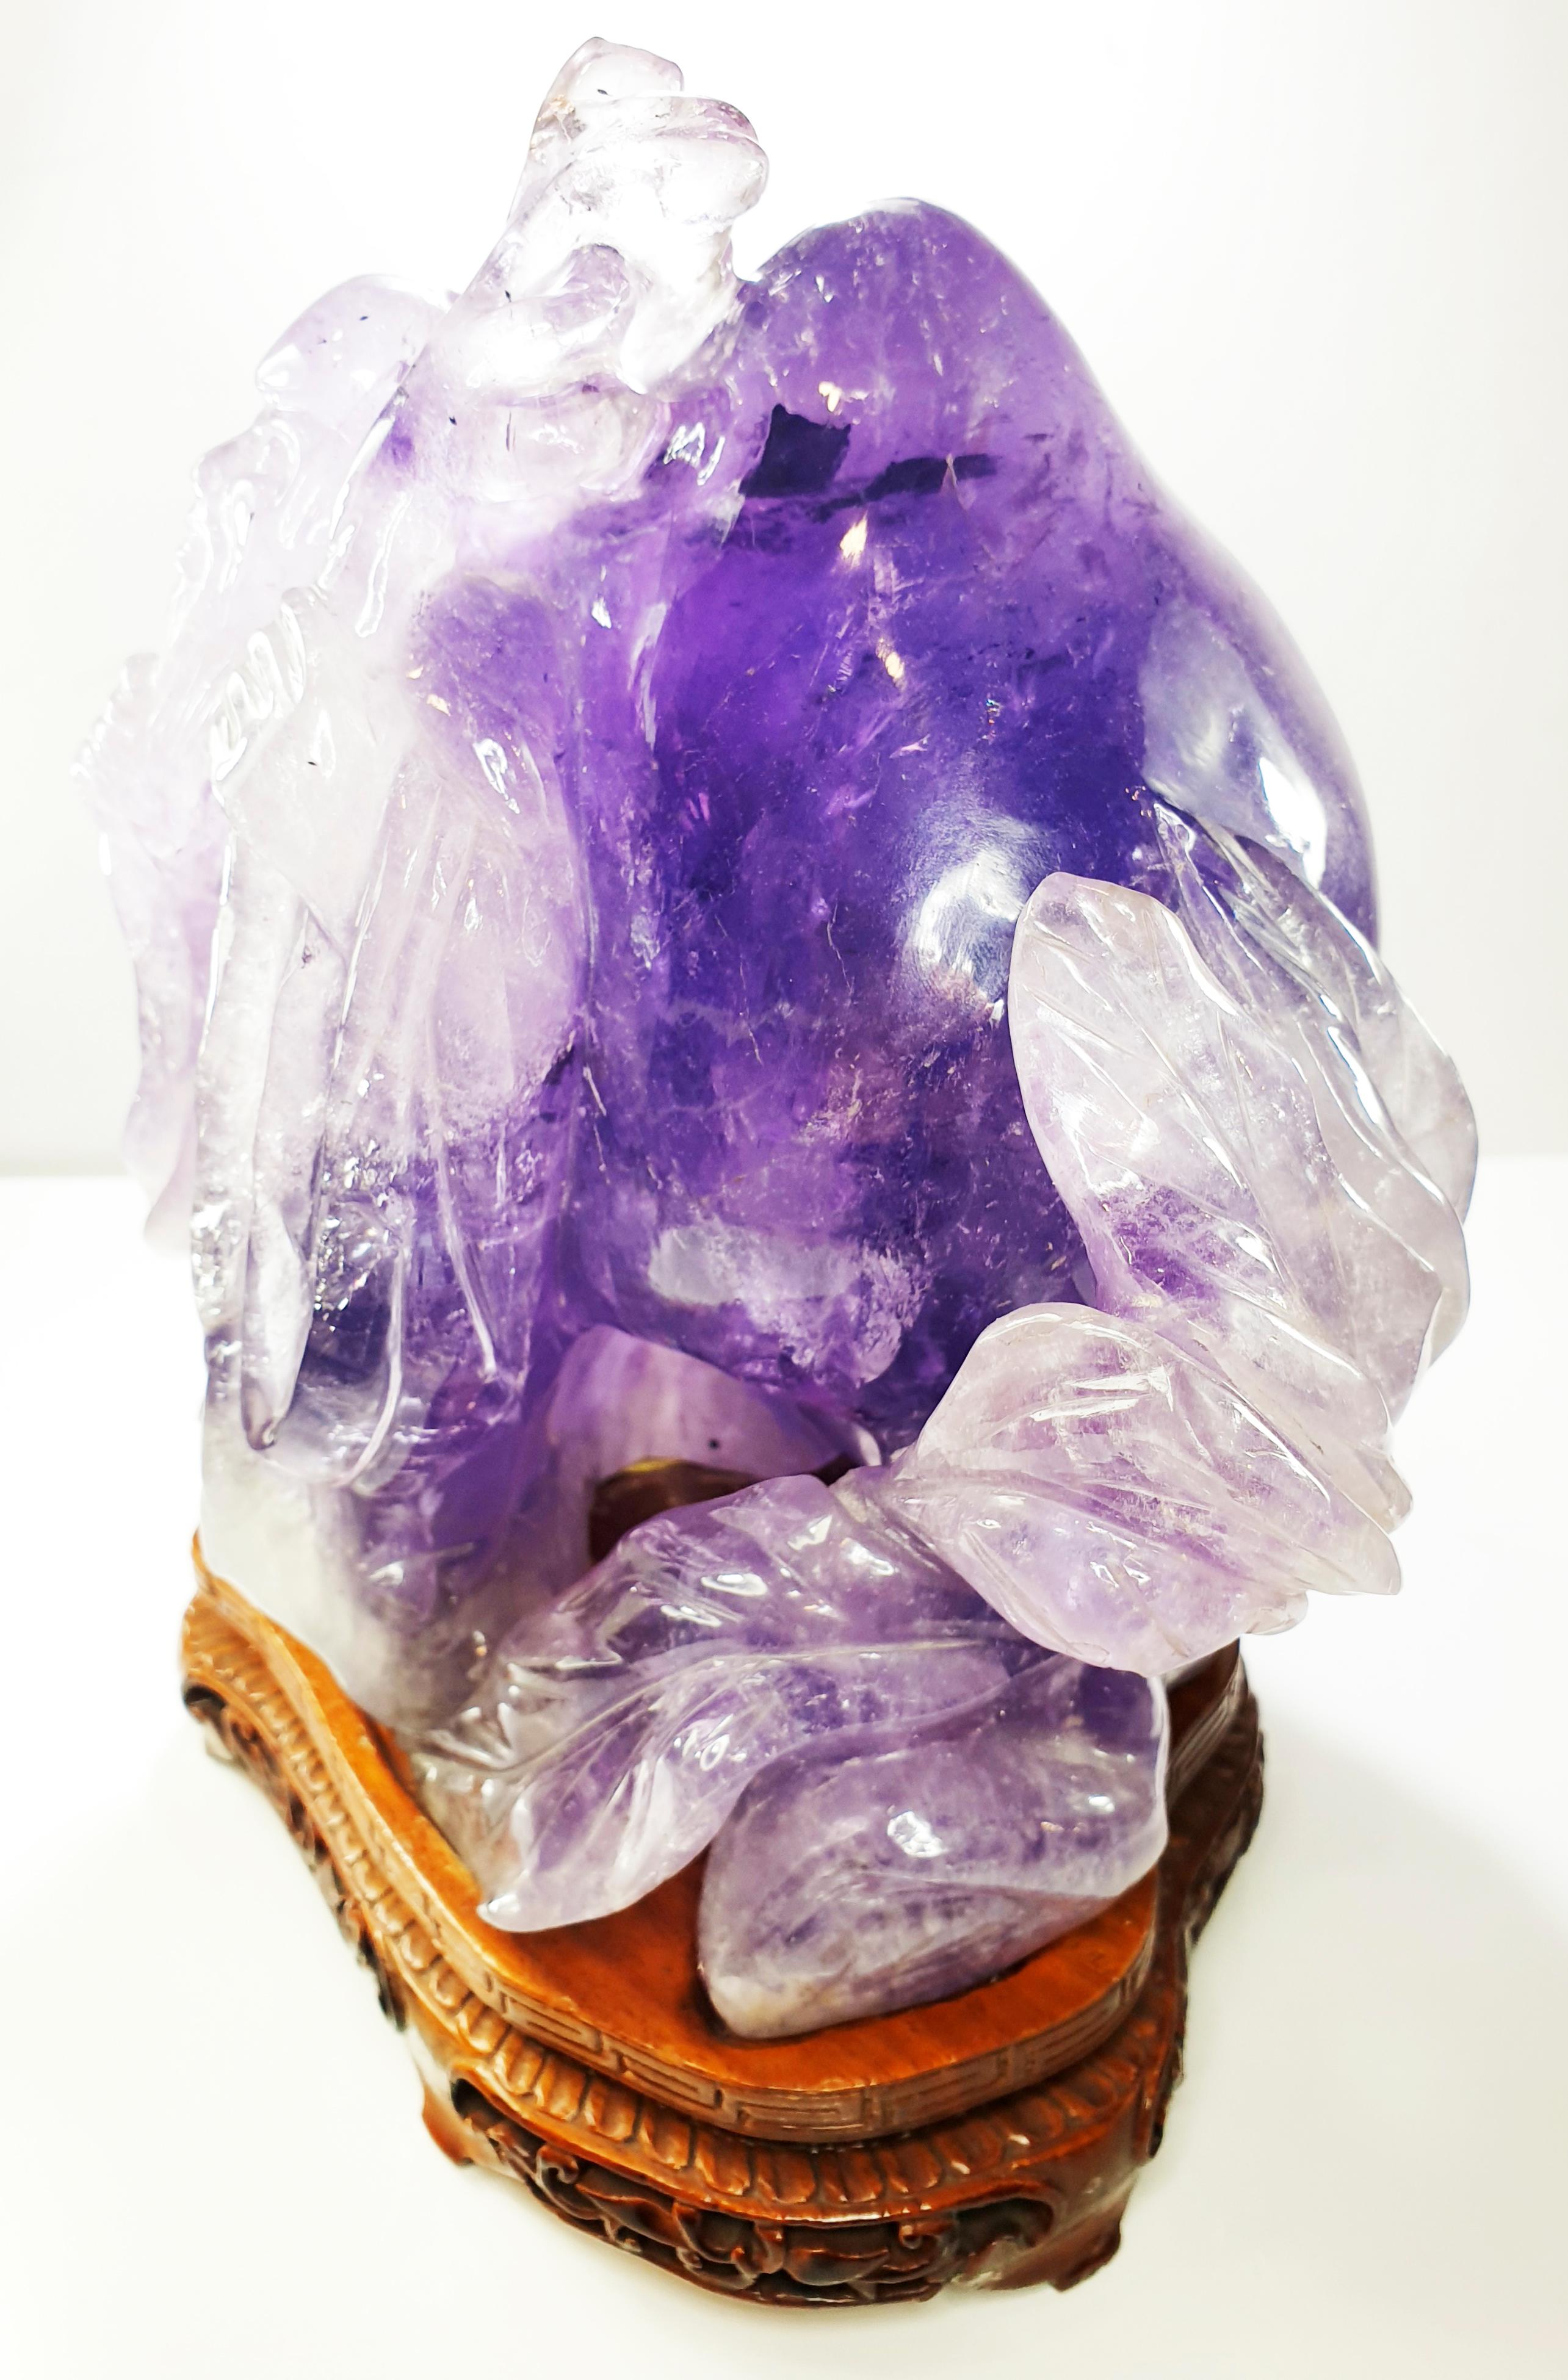 Artisan Carved 3.5kg Hardstone Amethyst Figure of Shoulao the Inmortal Chinese God For Sale